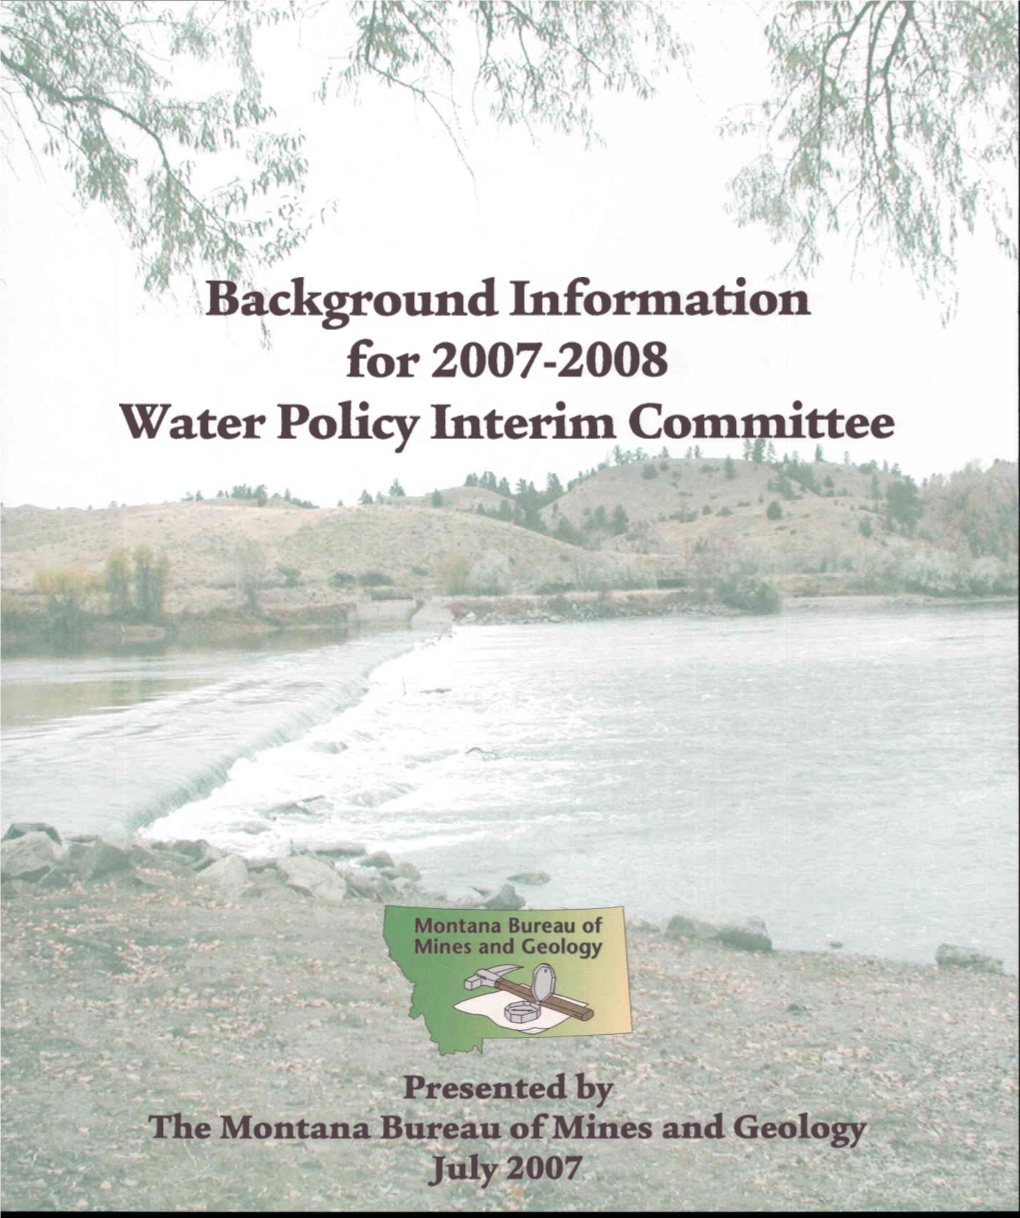 B Ackgro Und Info Rm Atio N for 2007-2008 Vater Policy Interirn Cornmittee